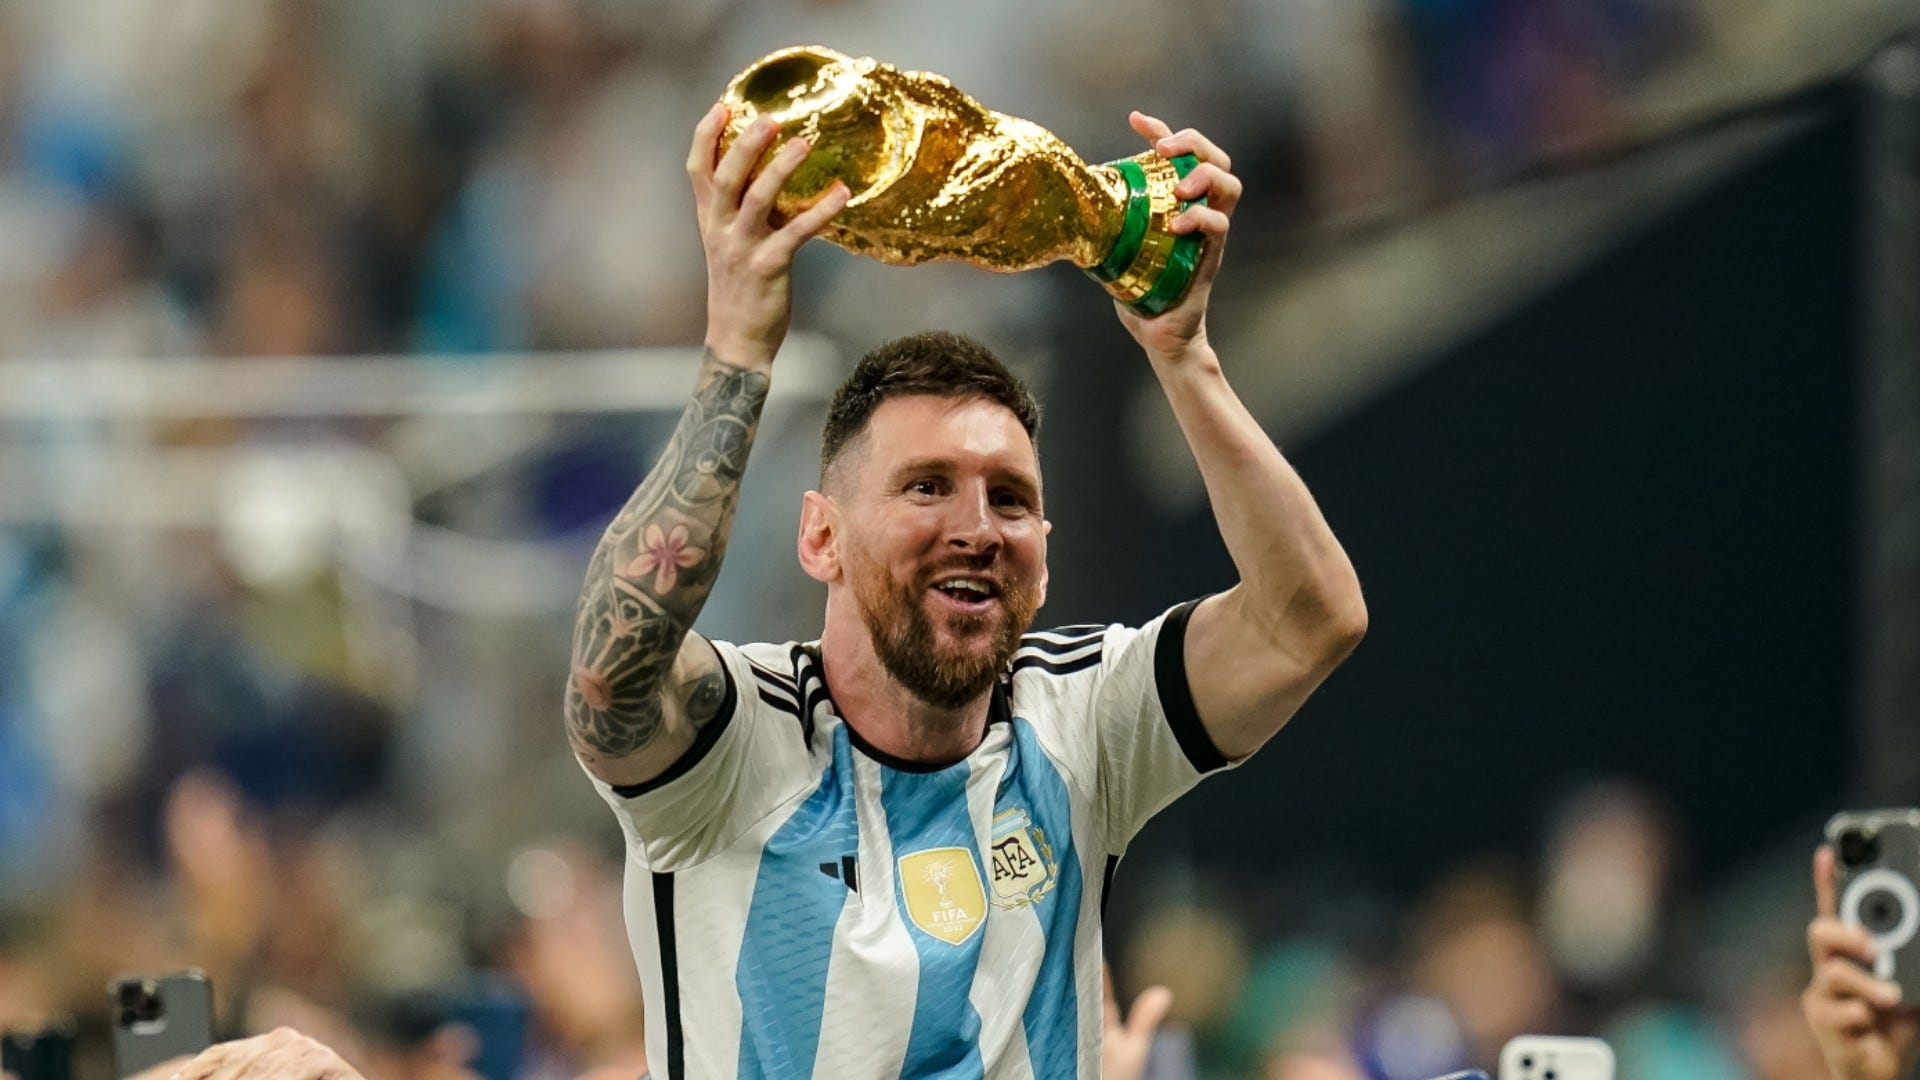 Lionel Messi lifted fake World Cup trophy in historic Instagram post |  Goal.com